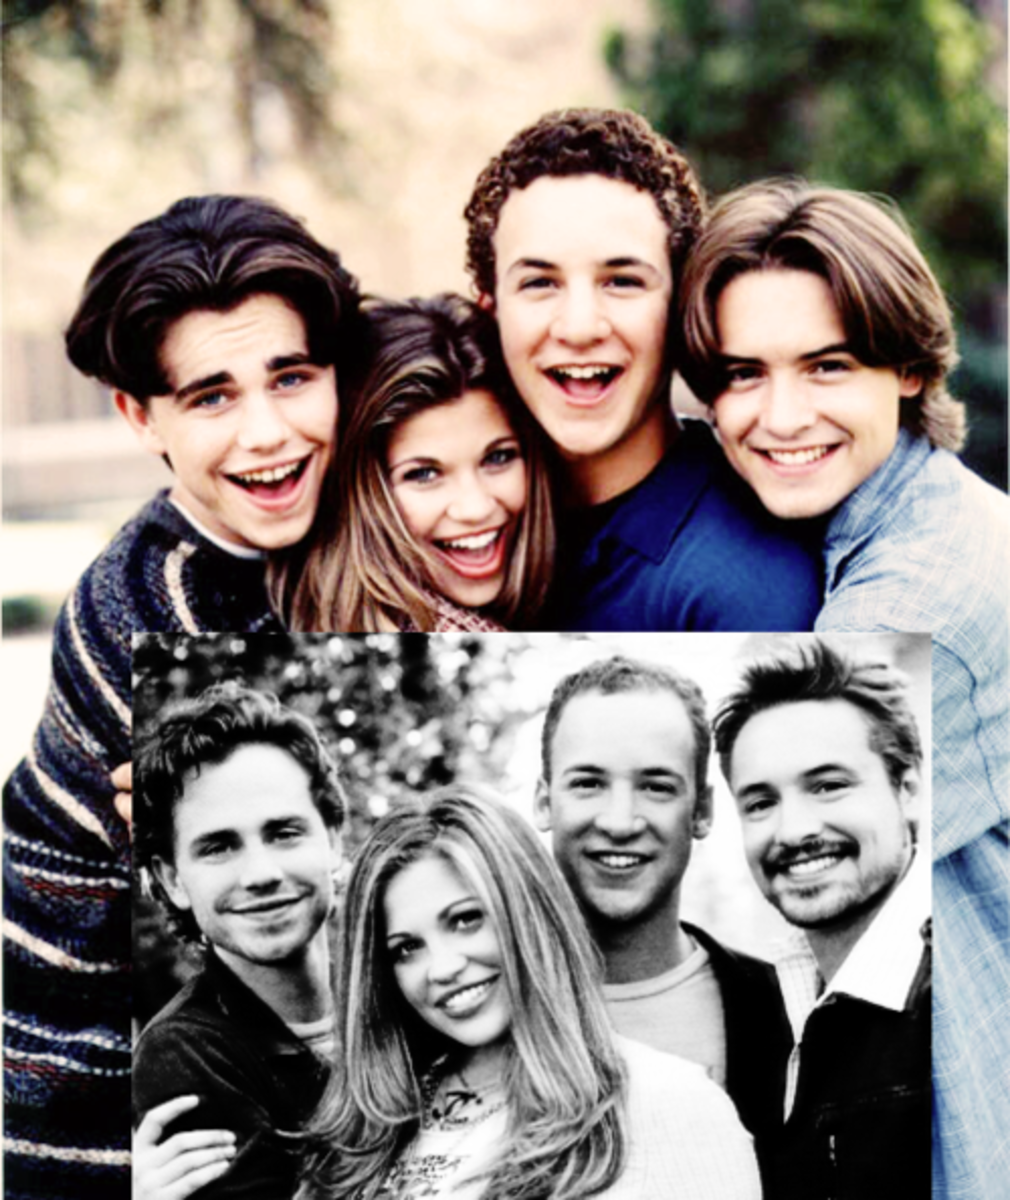 Boy Meets World - Where Are They Now?